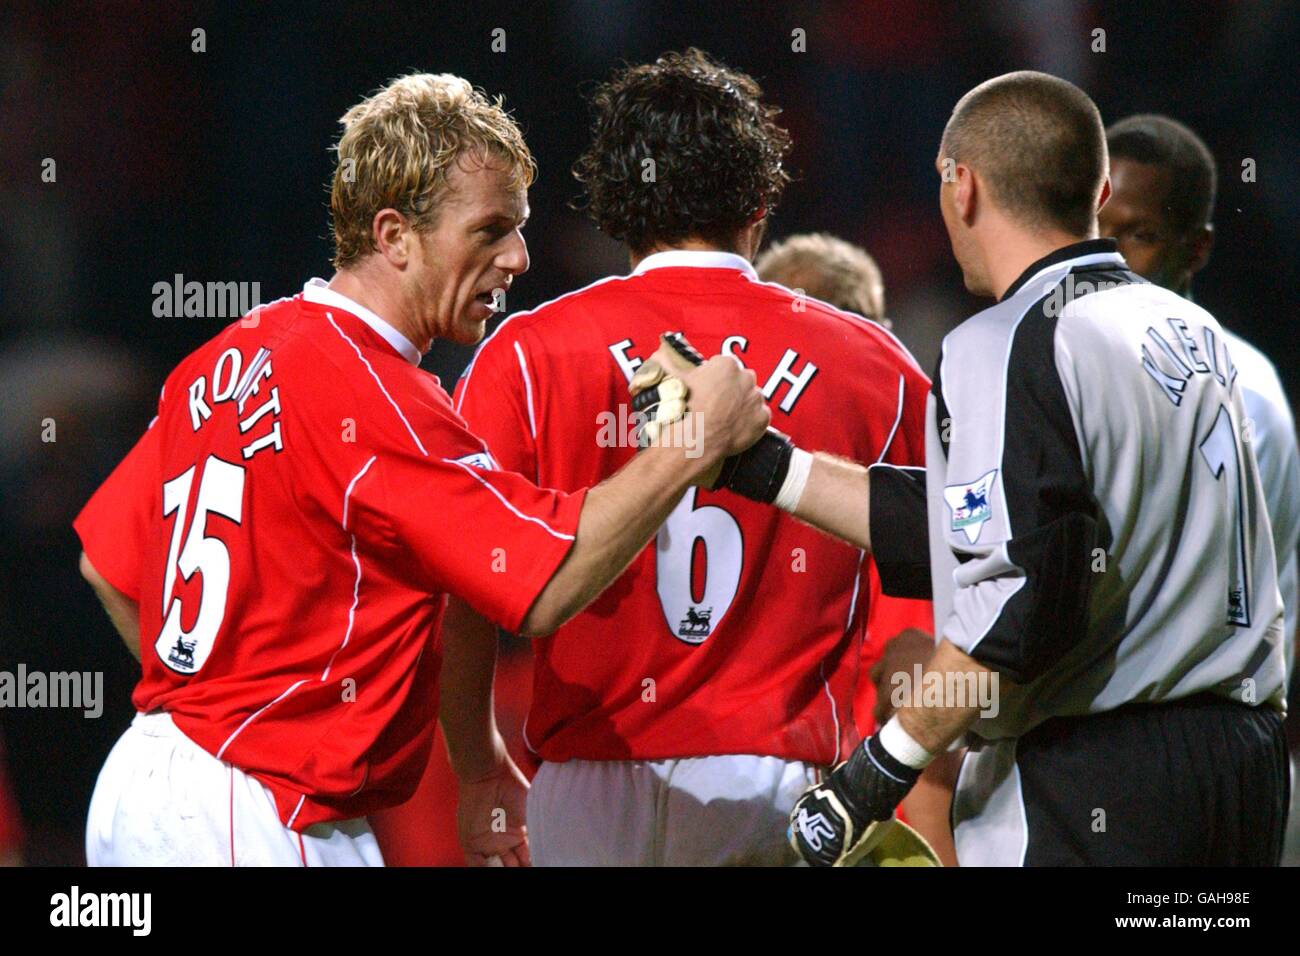 Charlton Athletic's Gary Rowett (l) and goalkeeper Dean Kiely (r) congratulate each other after beating Middlesbrough 1 - 0 Stock Photo